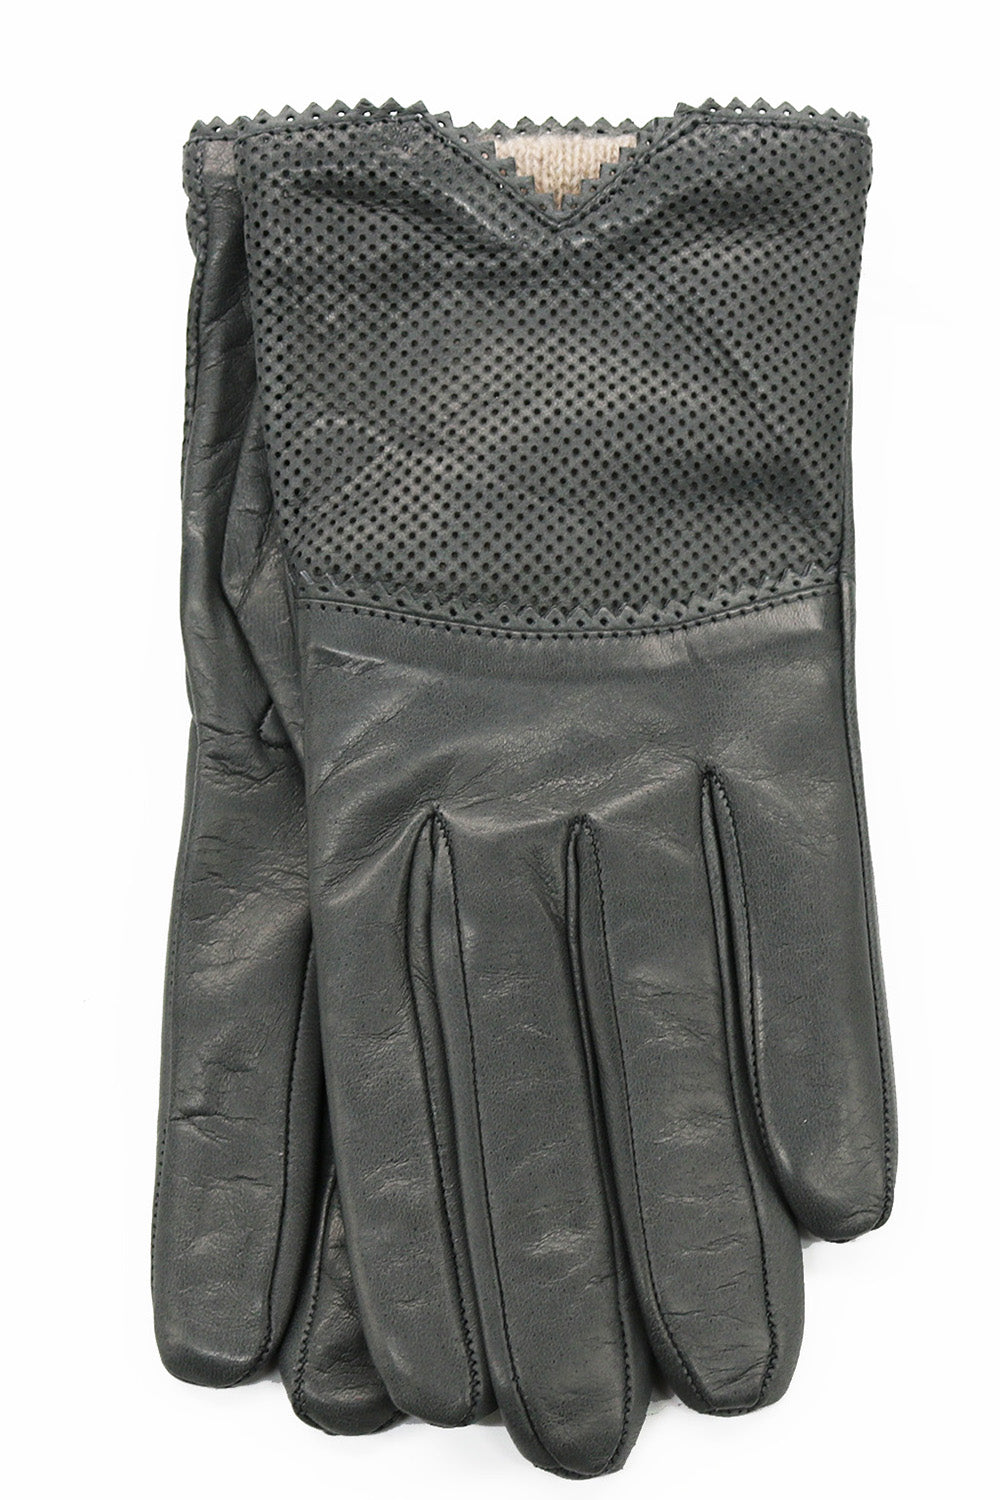 SCALLOPED PERFORATED GLOVE